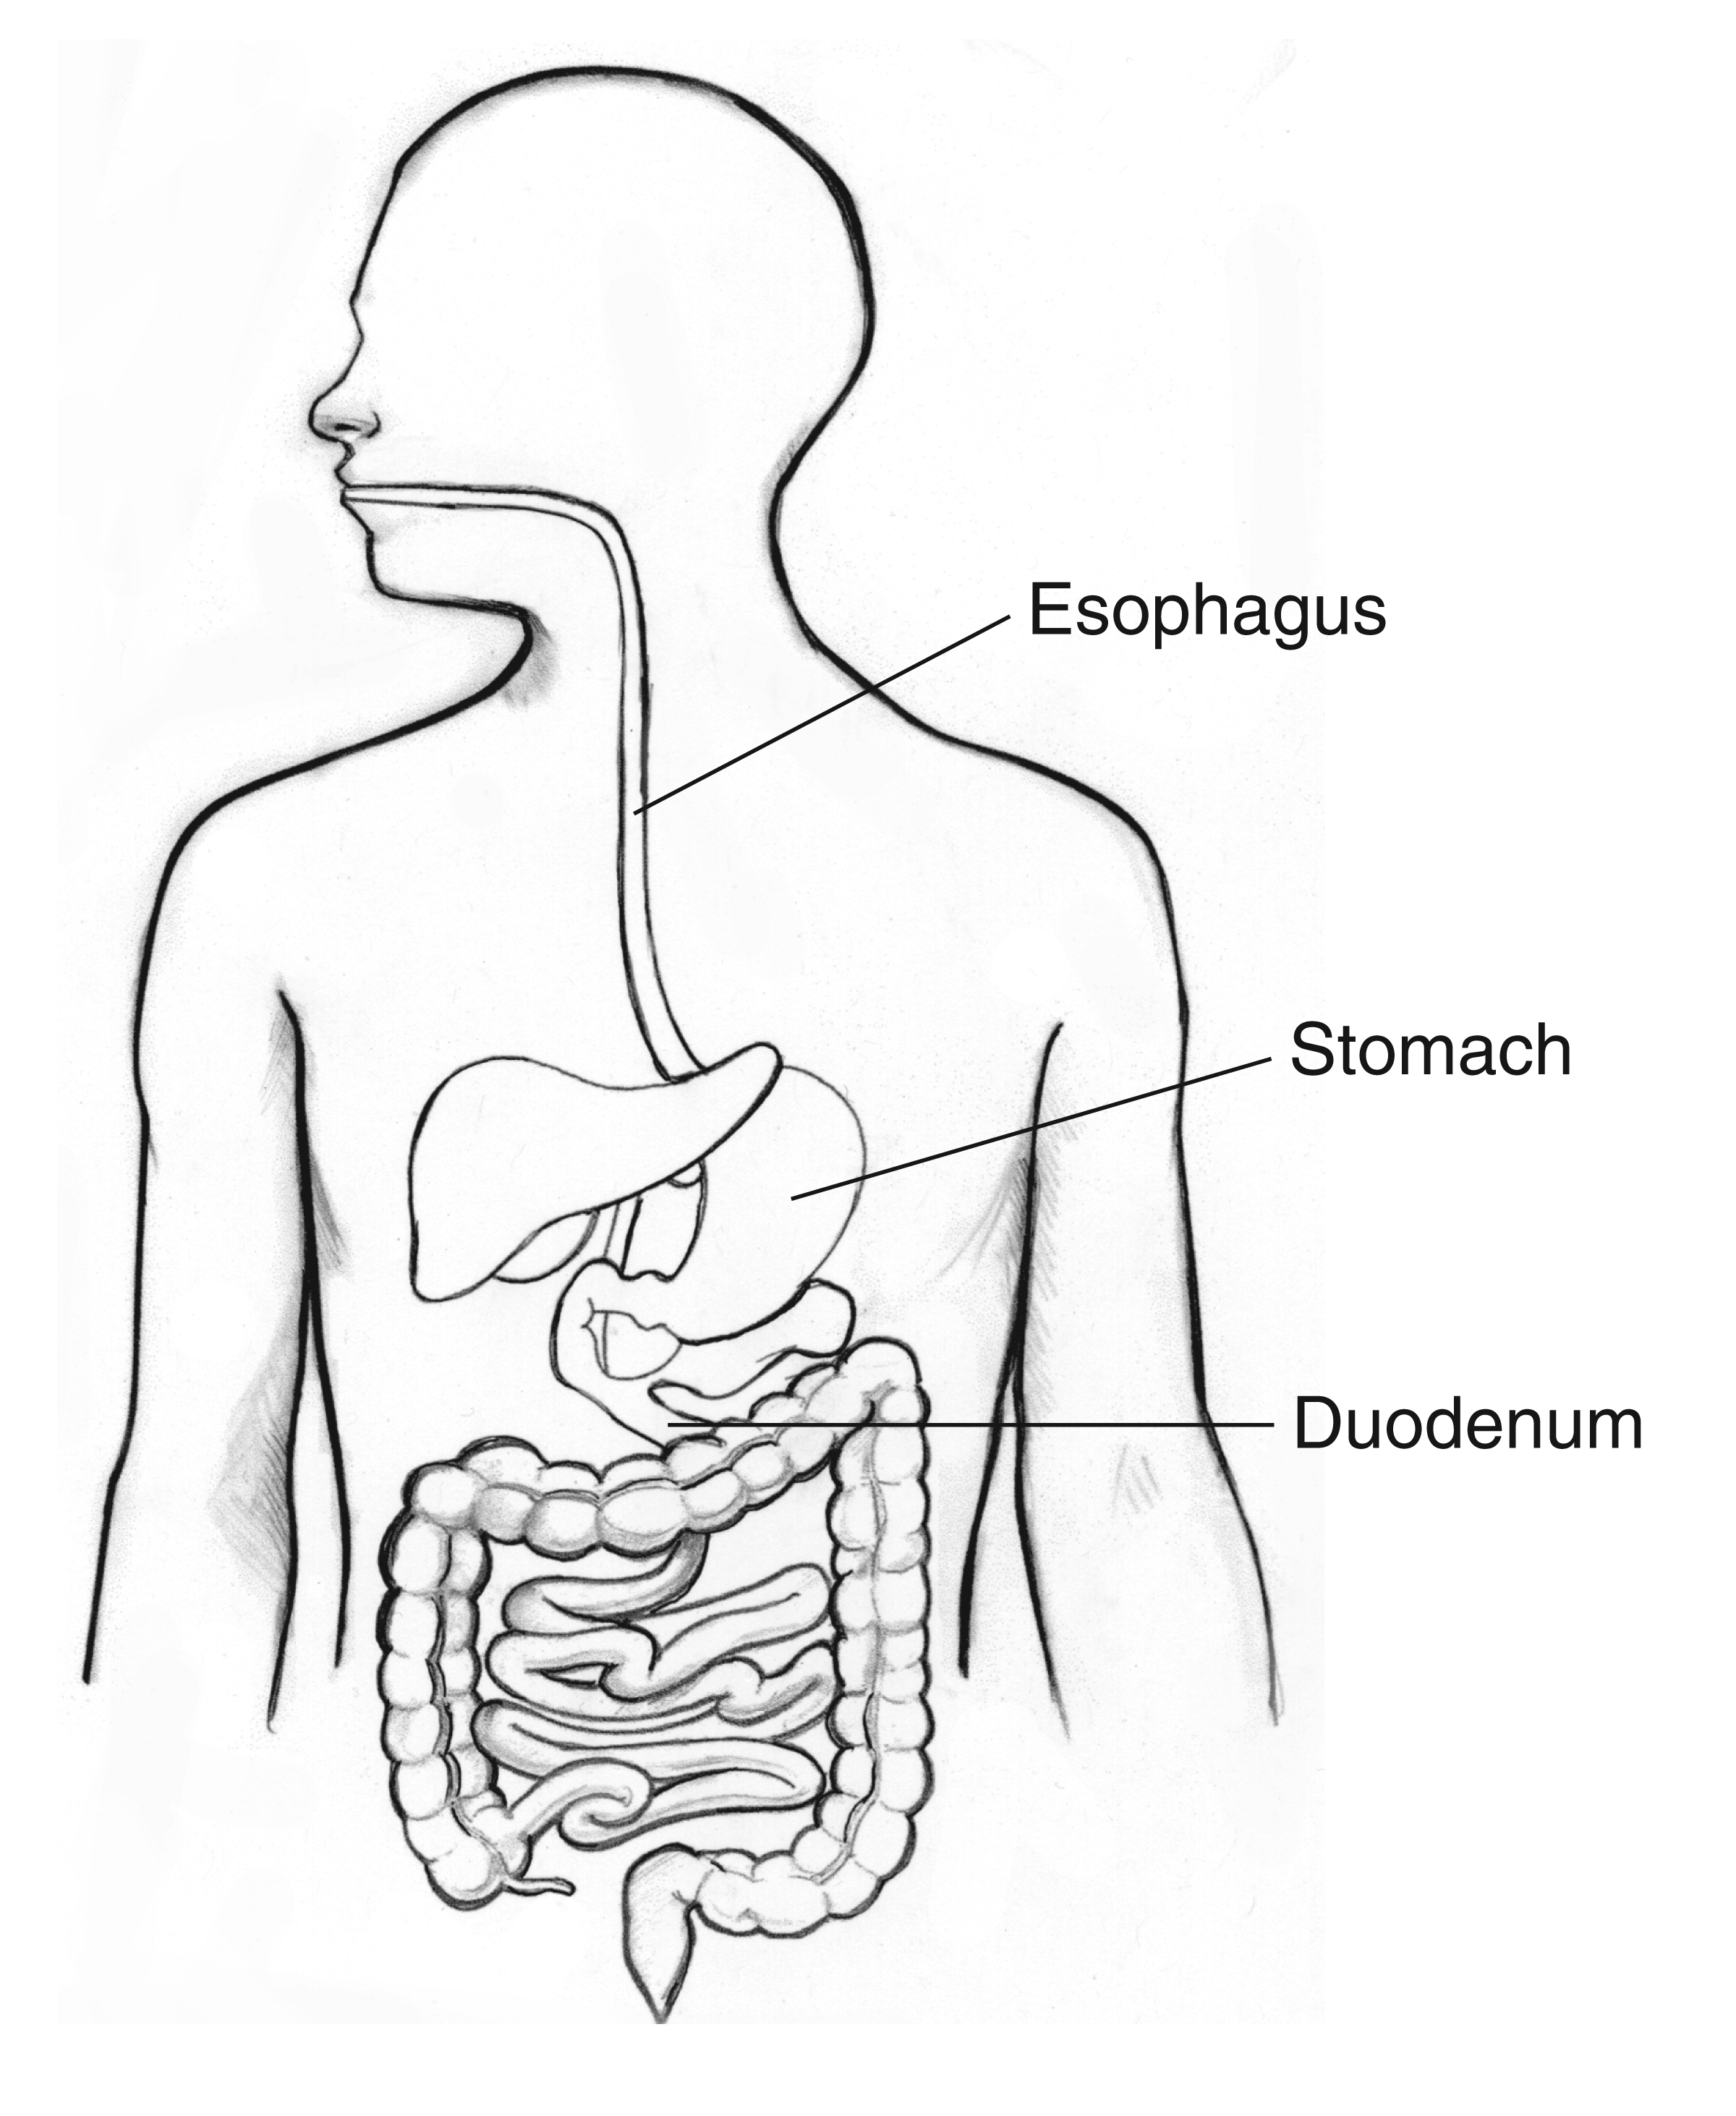 Digestive tract with the esophagus, stomach, and duodenum labeled | Media  Asset | NIDDK